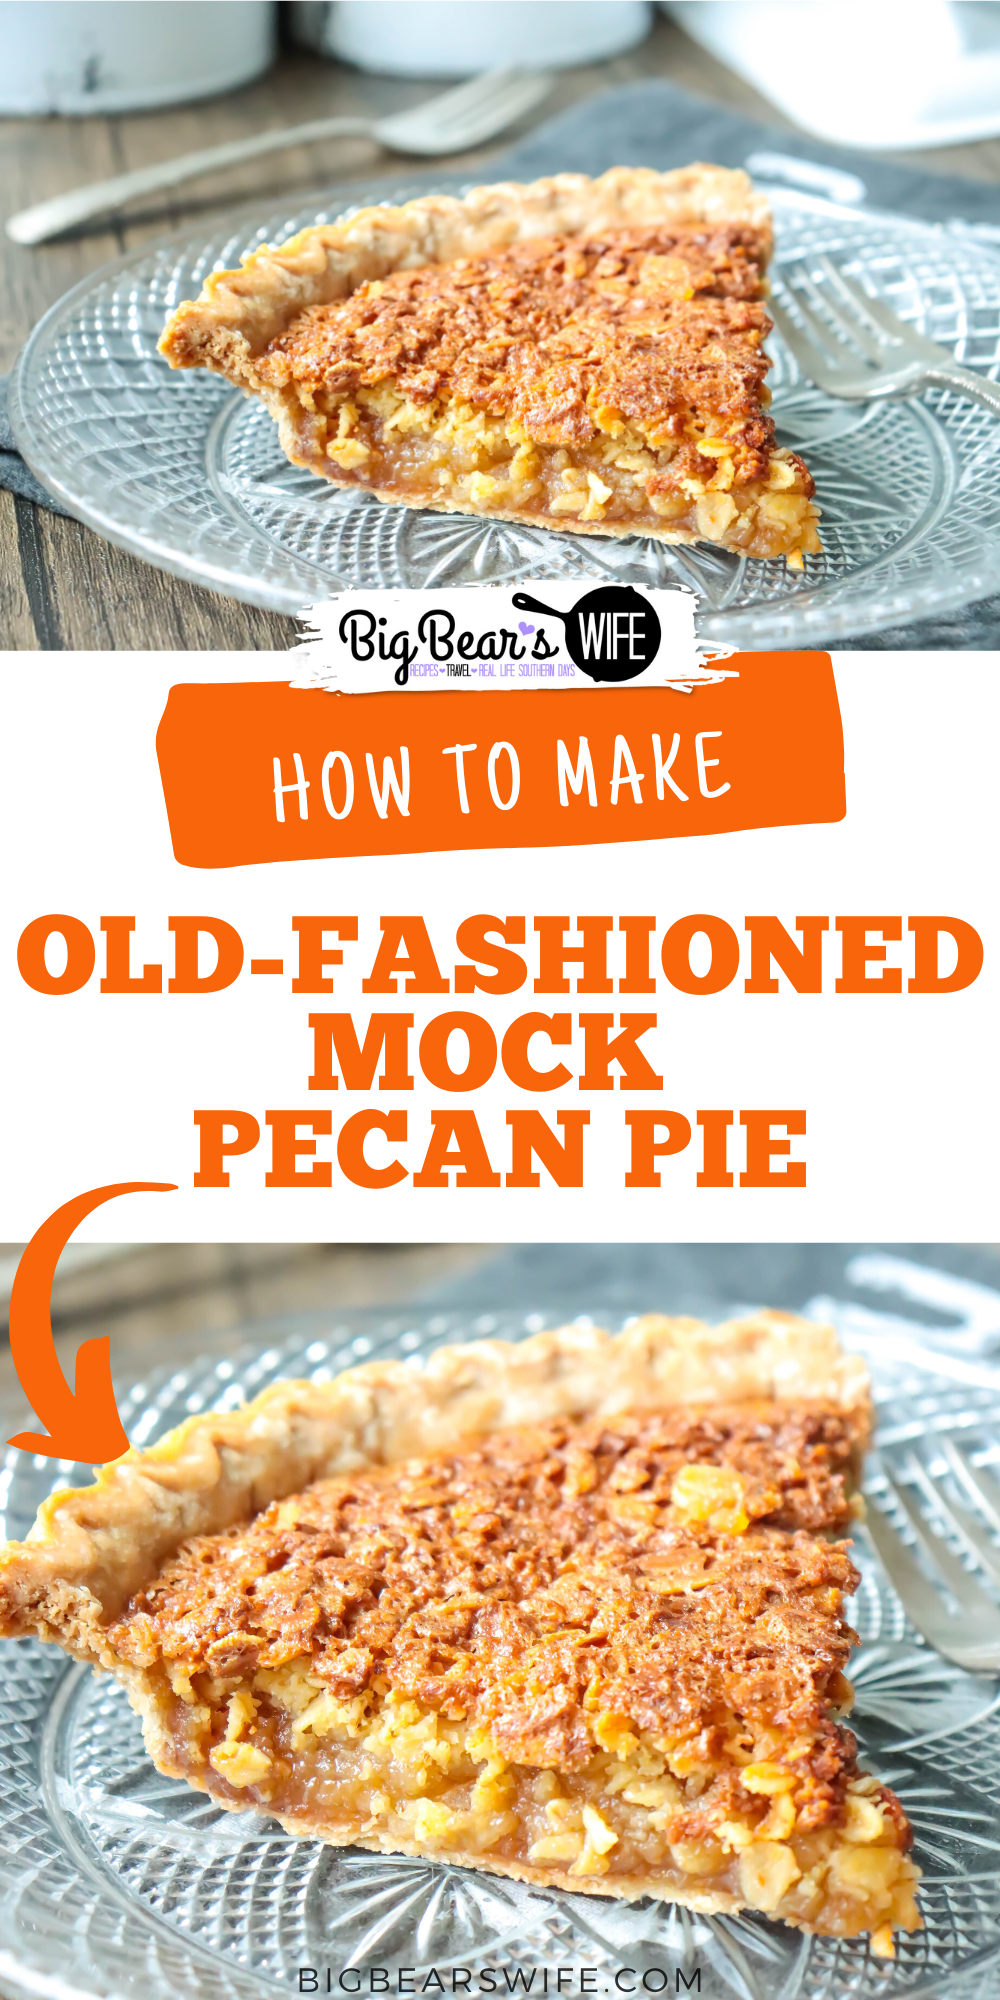 Old-Fashioned Mock Pecan Pie is a vintage pie recipe that is also know as "Depression Pie" or "Oatmeal Pie" and it was popular in the 1920s and 1930s during the depression.  via @bigbearswife